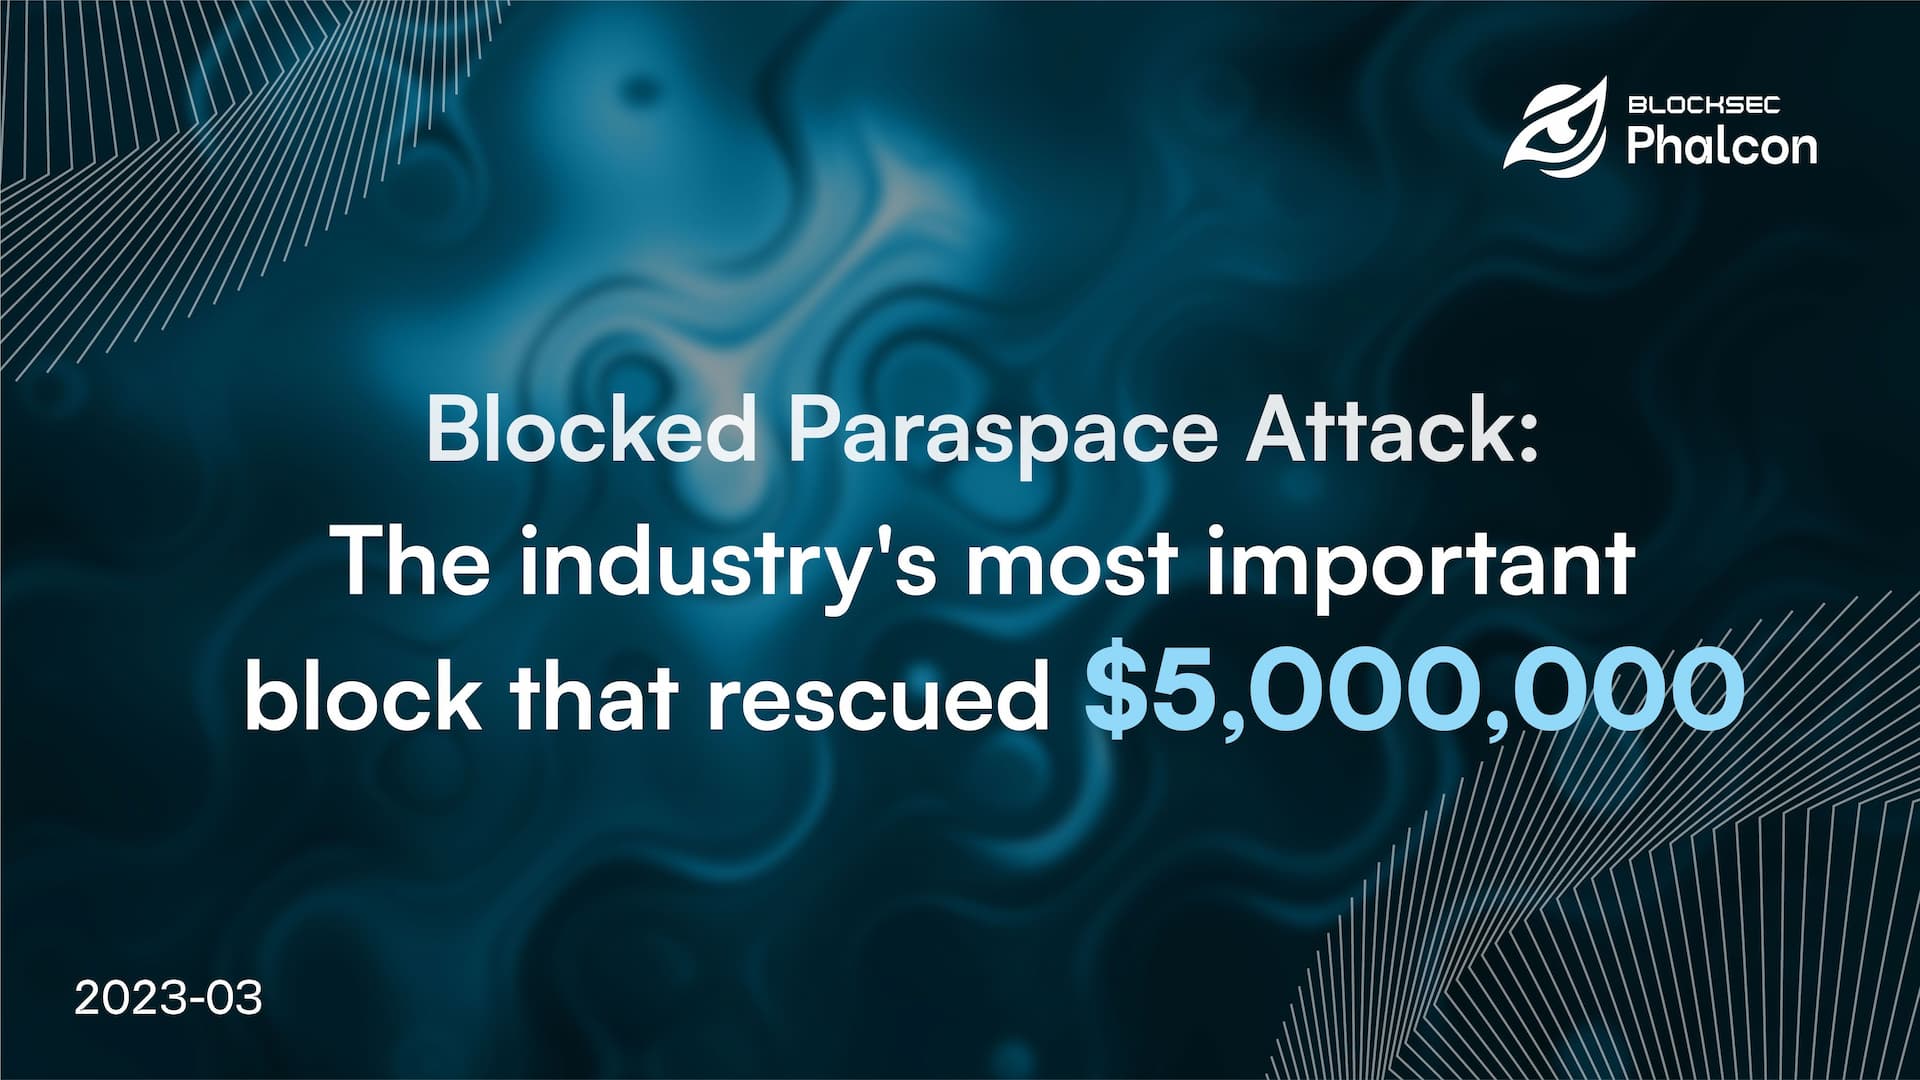 #1 Blocked Paraspace Attack: Industry's Most Important Block that Rescued $5,000,000